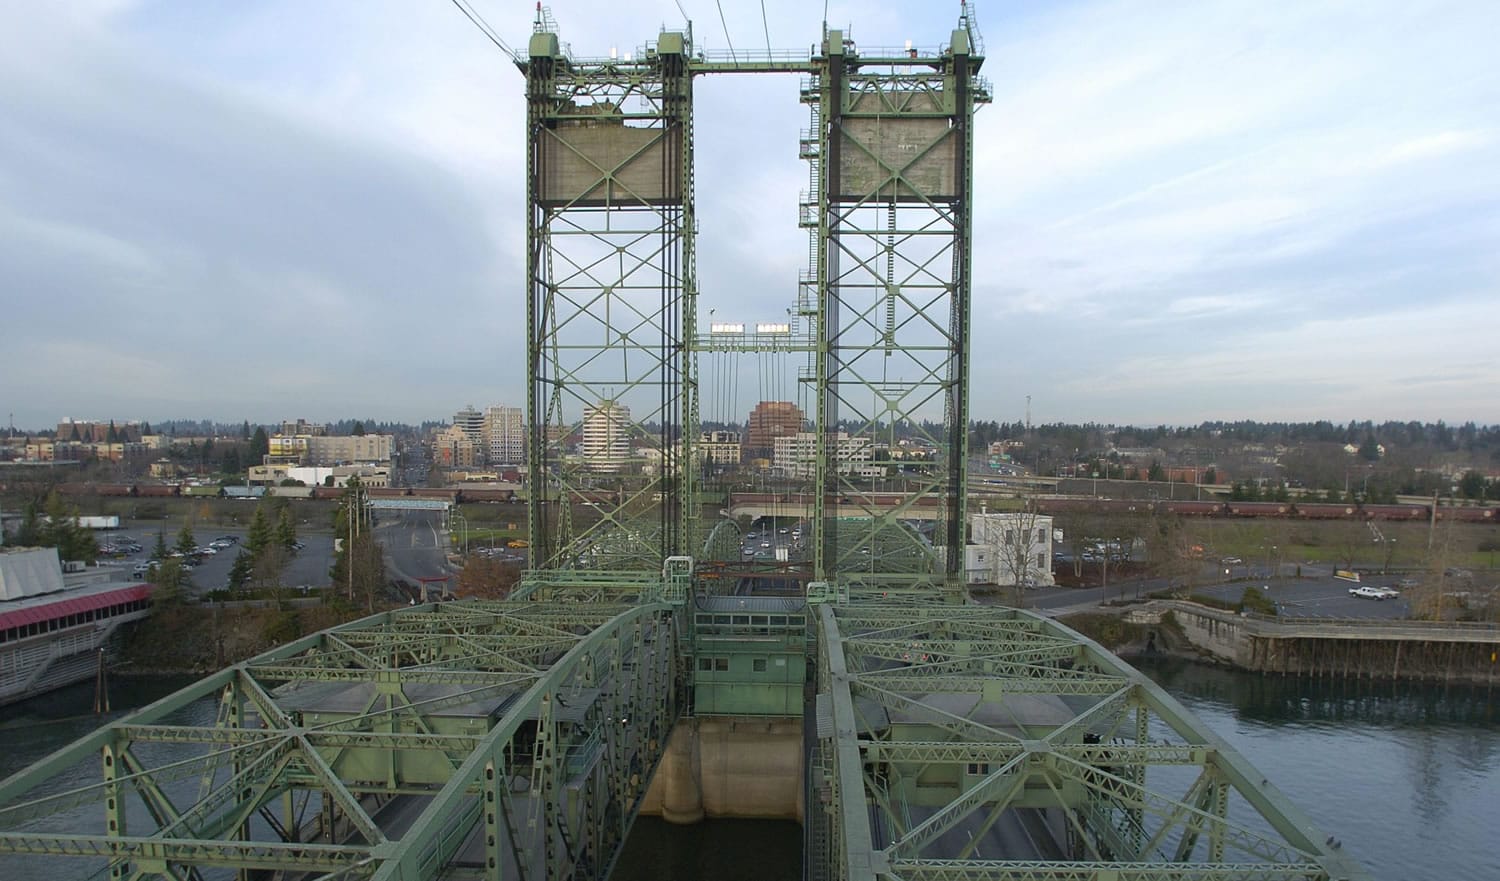 The I-5 bridge looking north from the southeast tower into Vancouver.